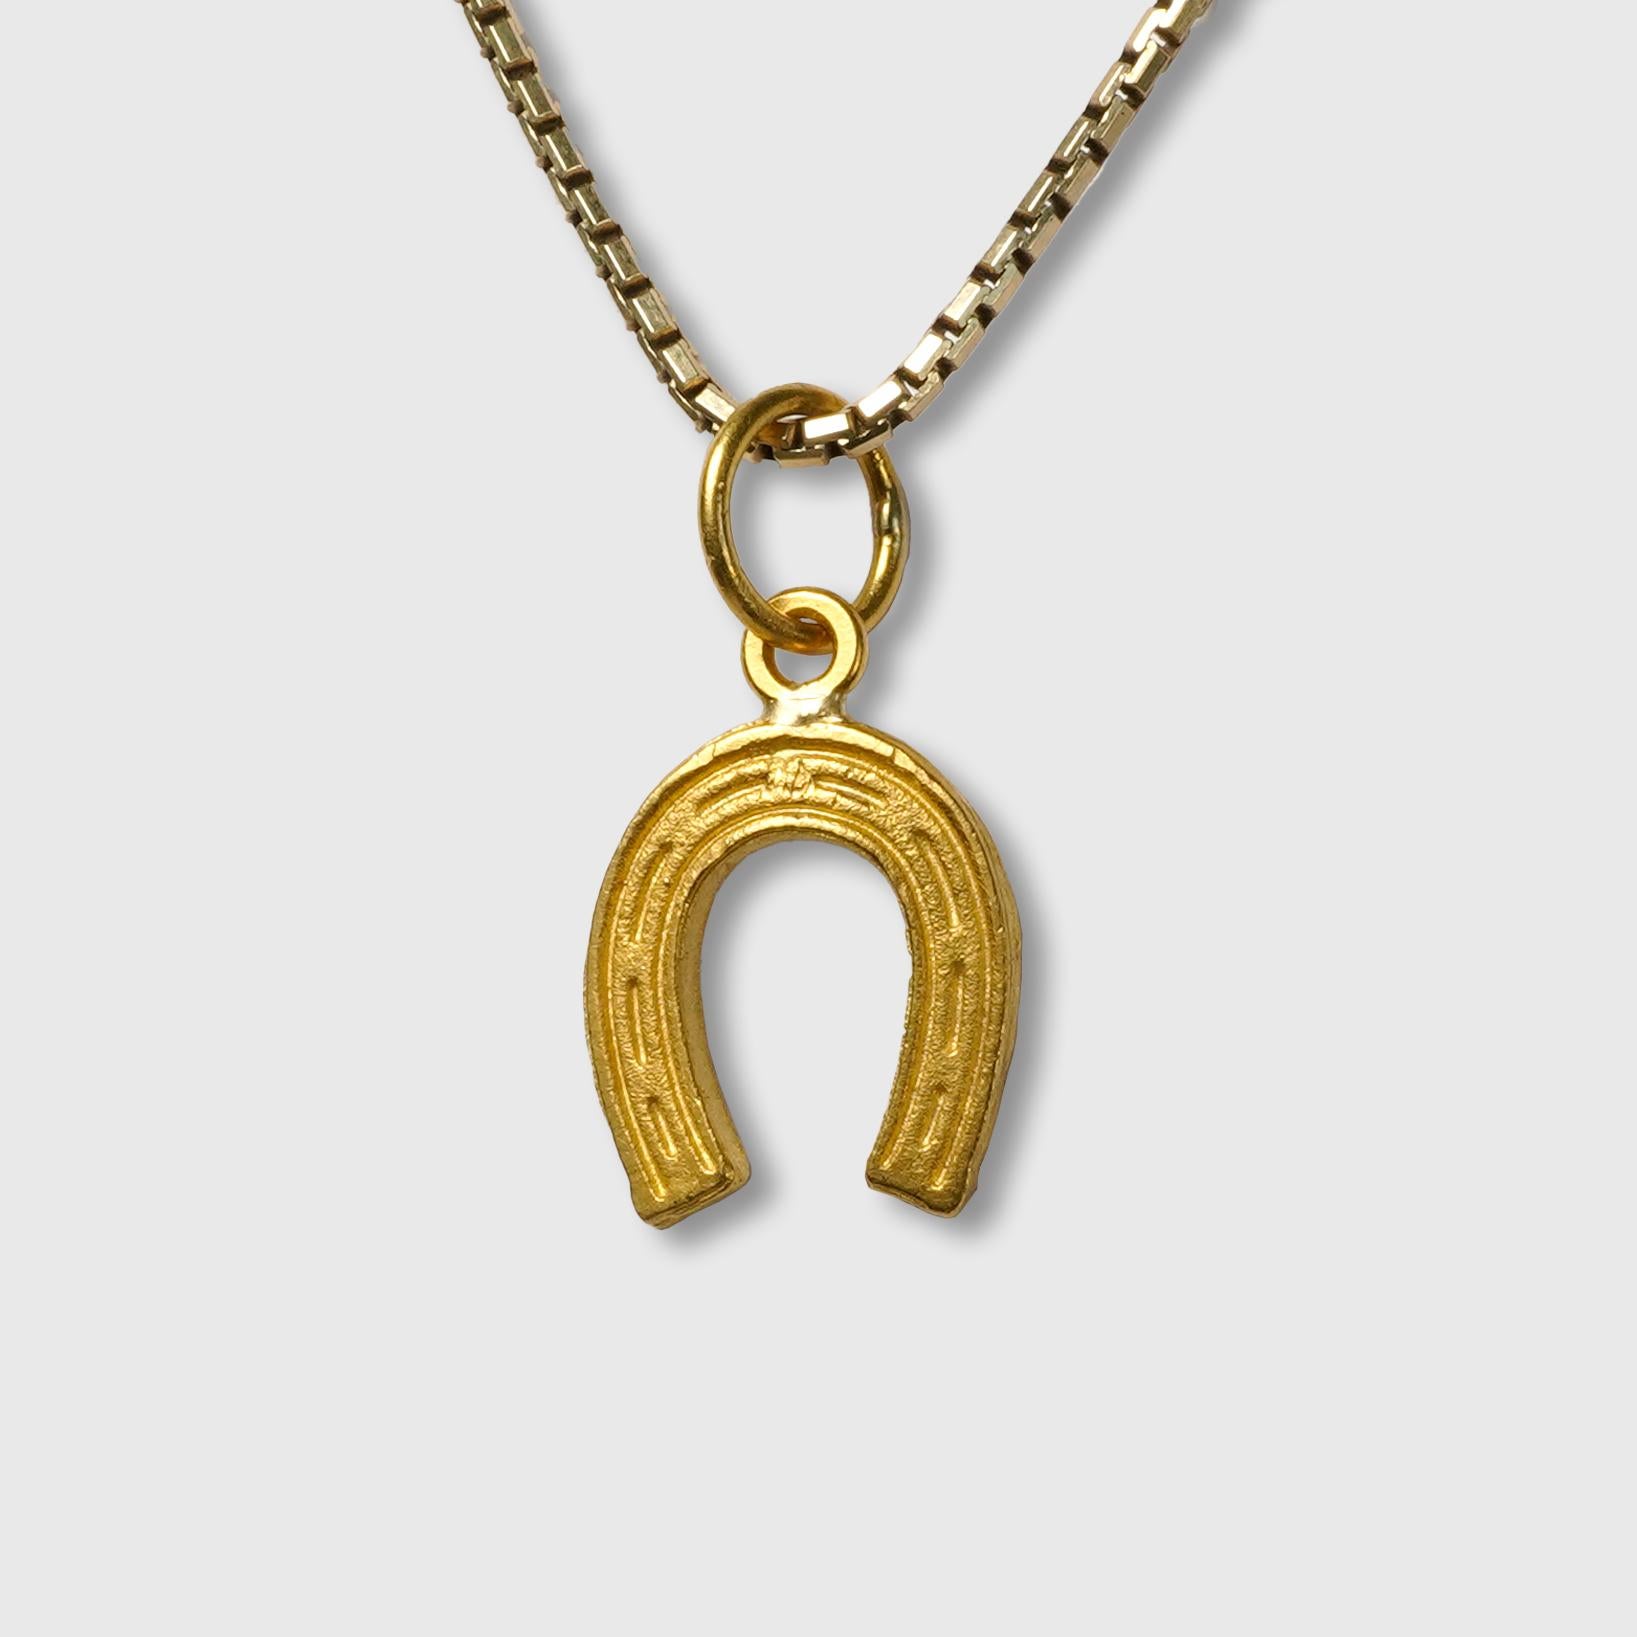 Horse Shoe Charm Pendant, 24K Gold and 0.02ct Diamonds, Tradition, Good Luck, Symbol of protection.

Size - Small Charm (Looks great paired and layered with other charm pendants)
1 Diamond - 0.02cts
24K Solid Gold - 1.68 grams

THE STORY

The